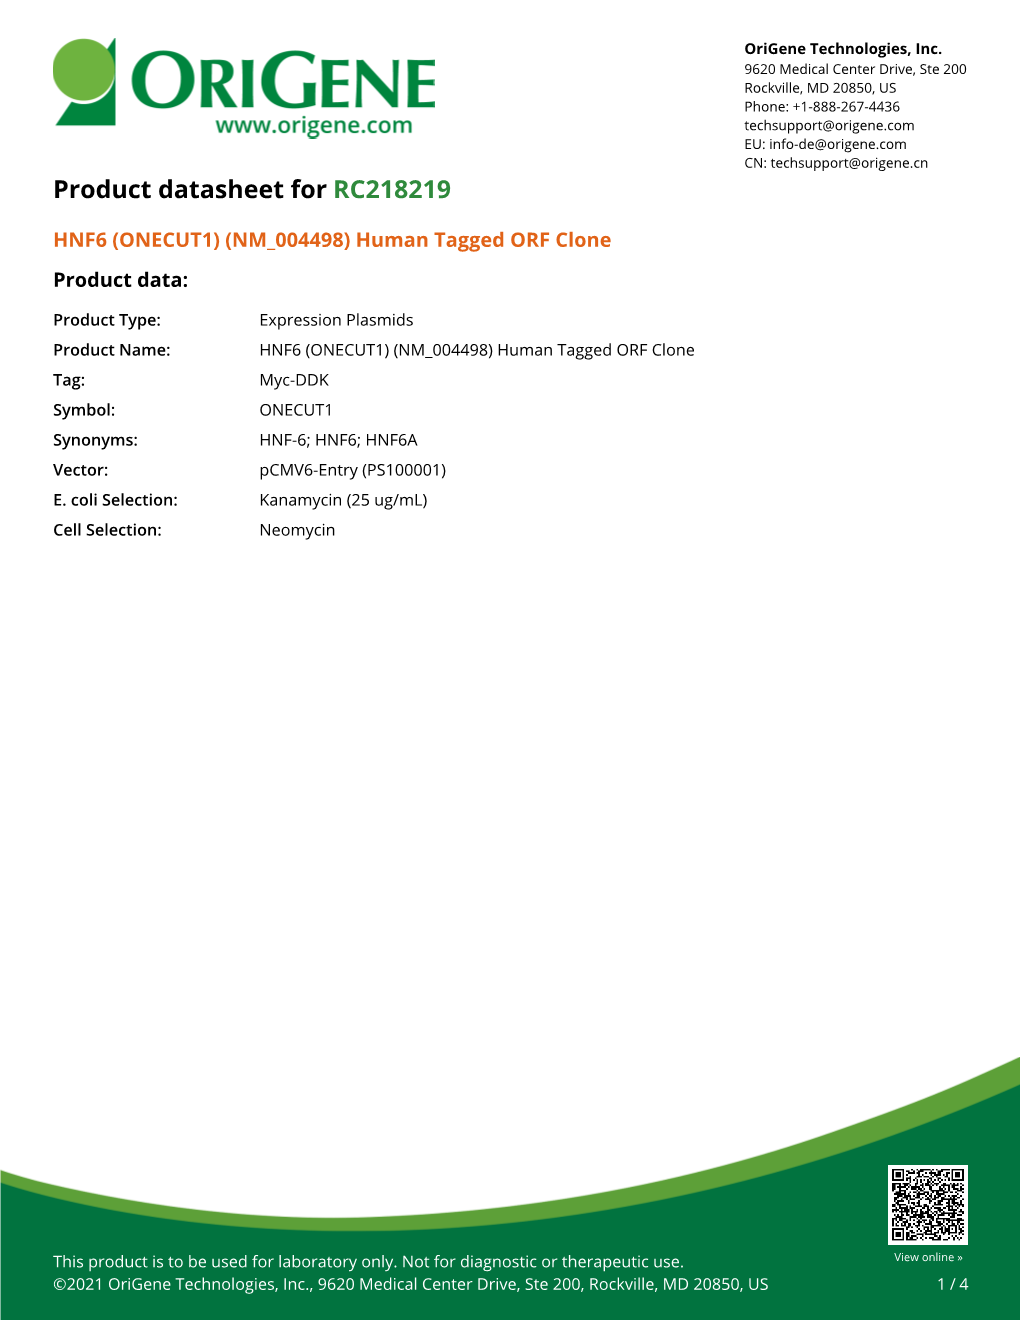 HNF6 (ONECUT1) (NM 004498) Human Tagged ORF Clone Product Data